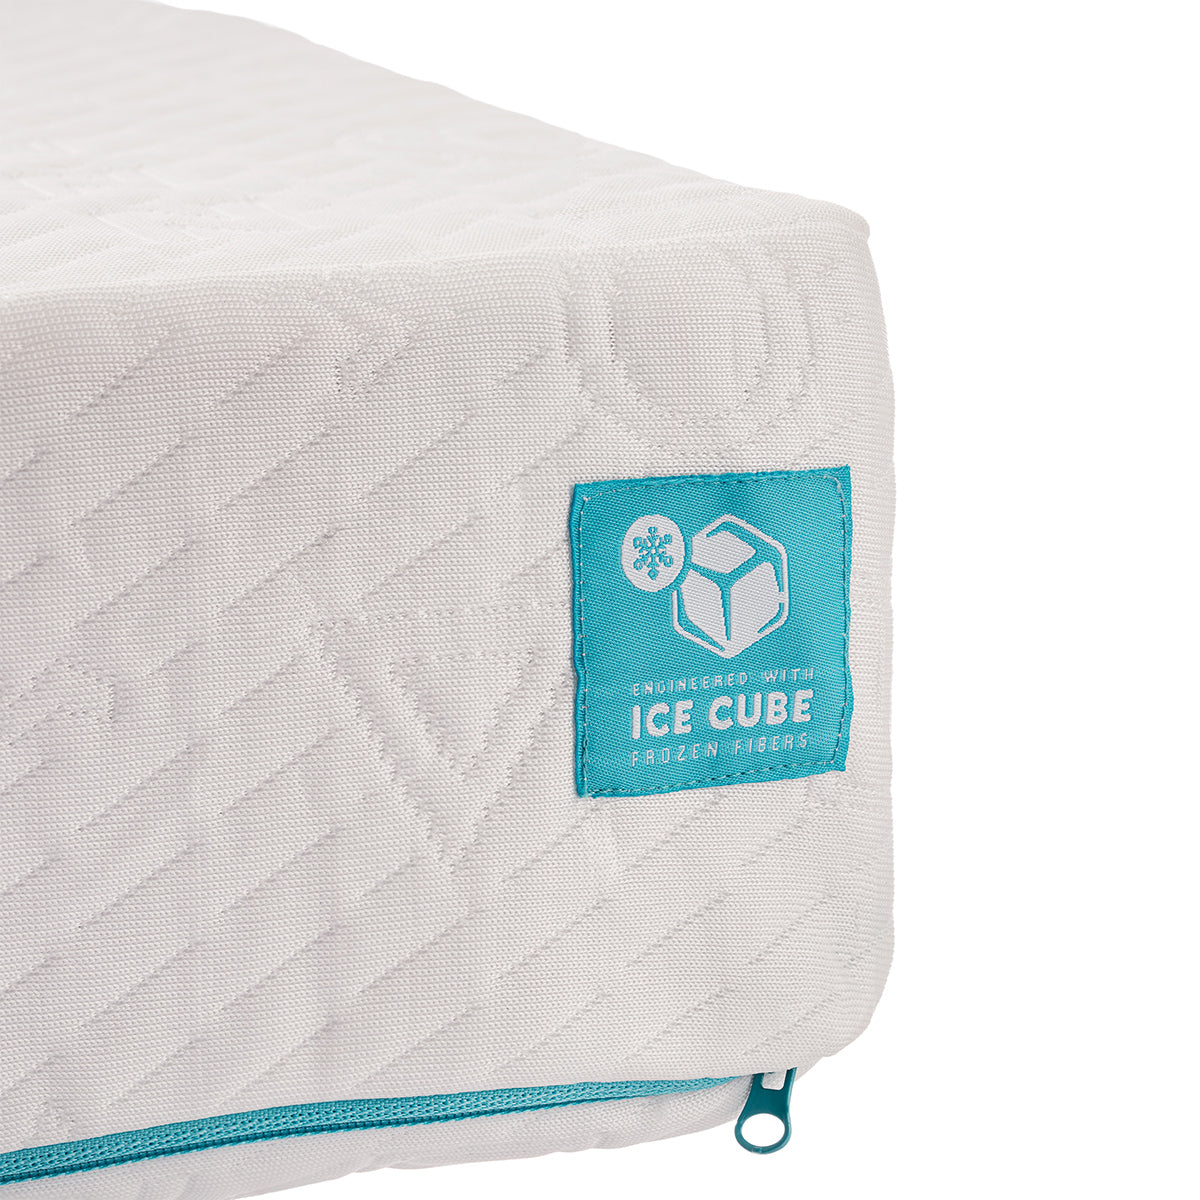 Pillow Cube Products